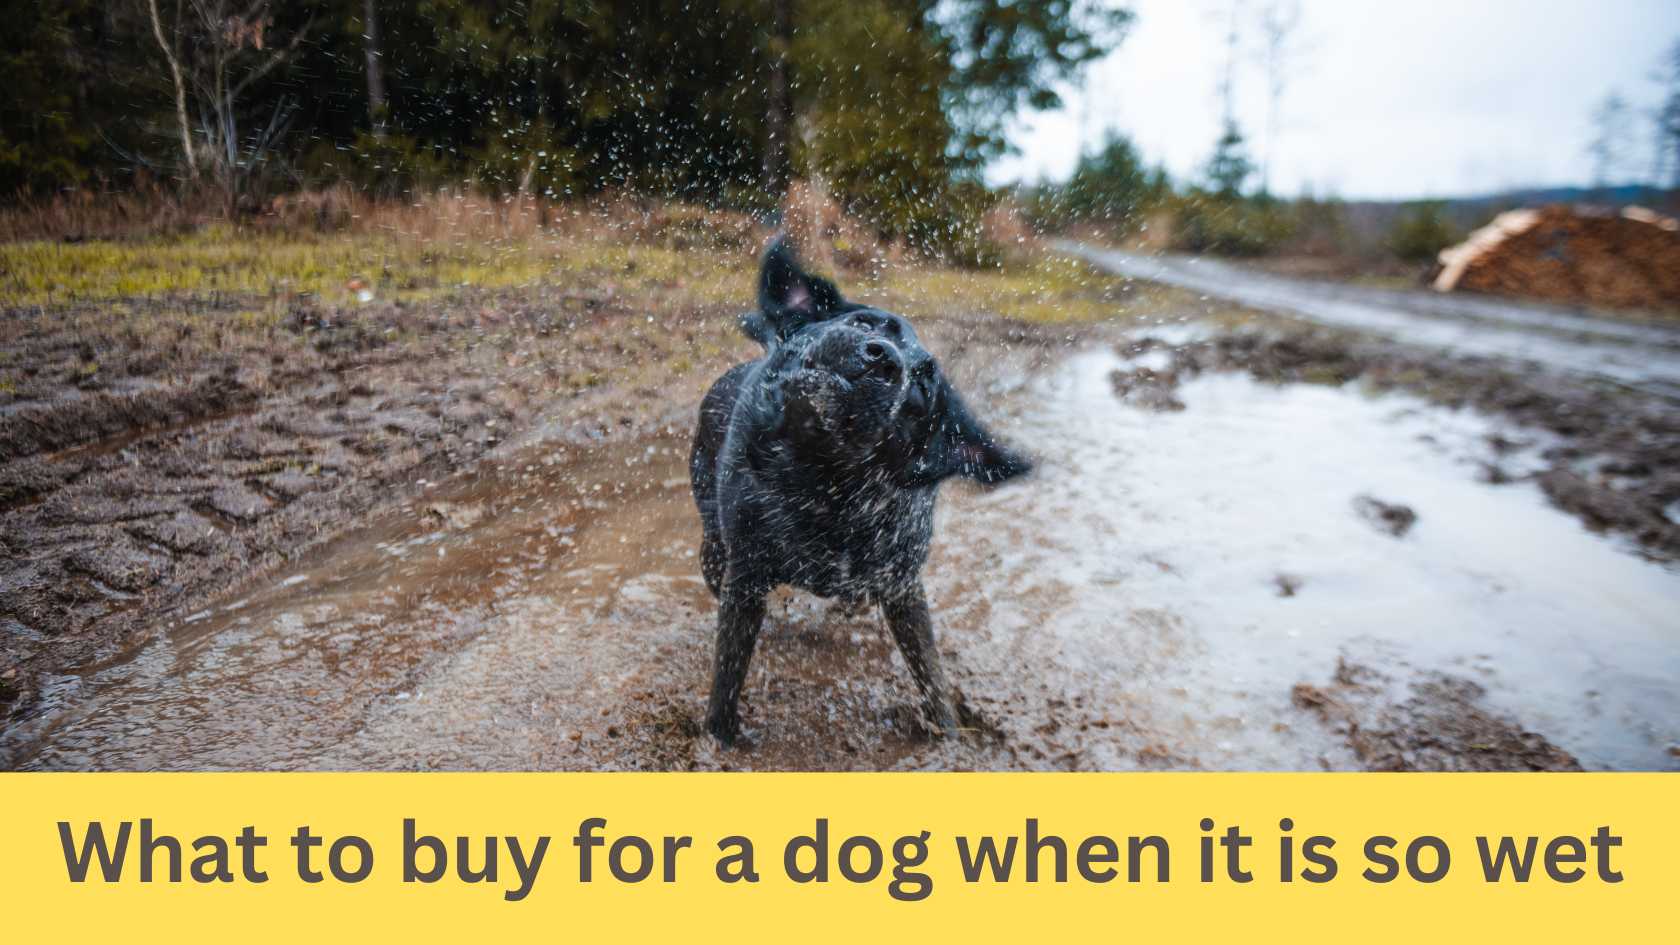 What to buy for a dog when it is so wet